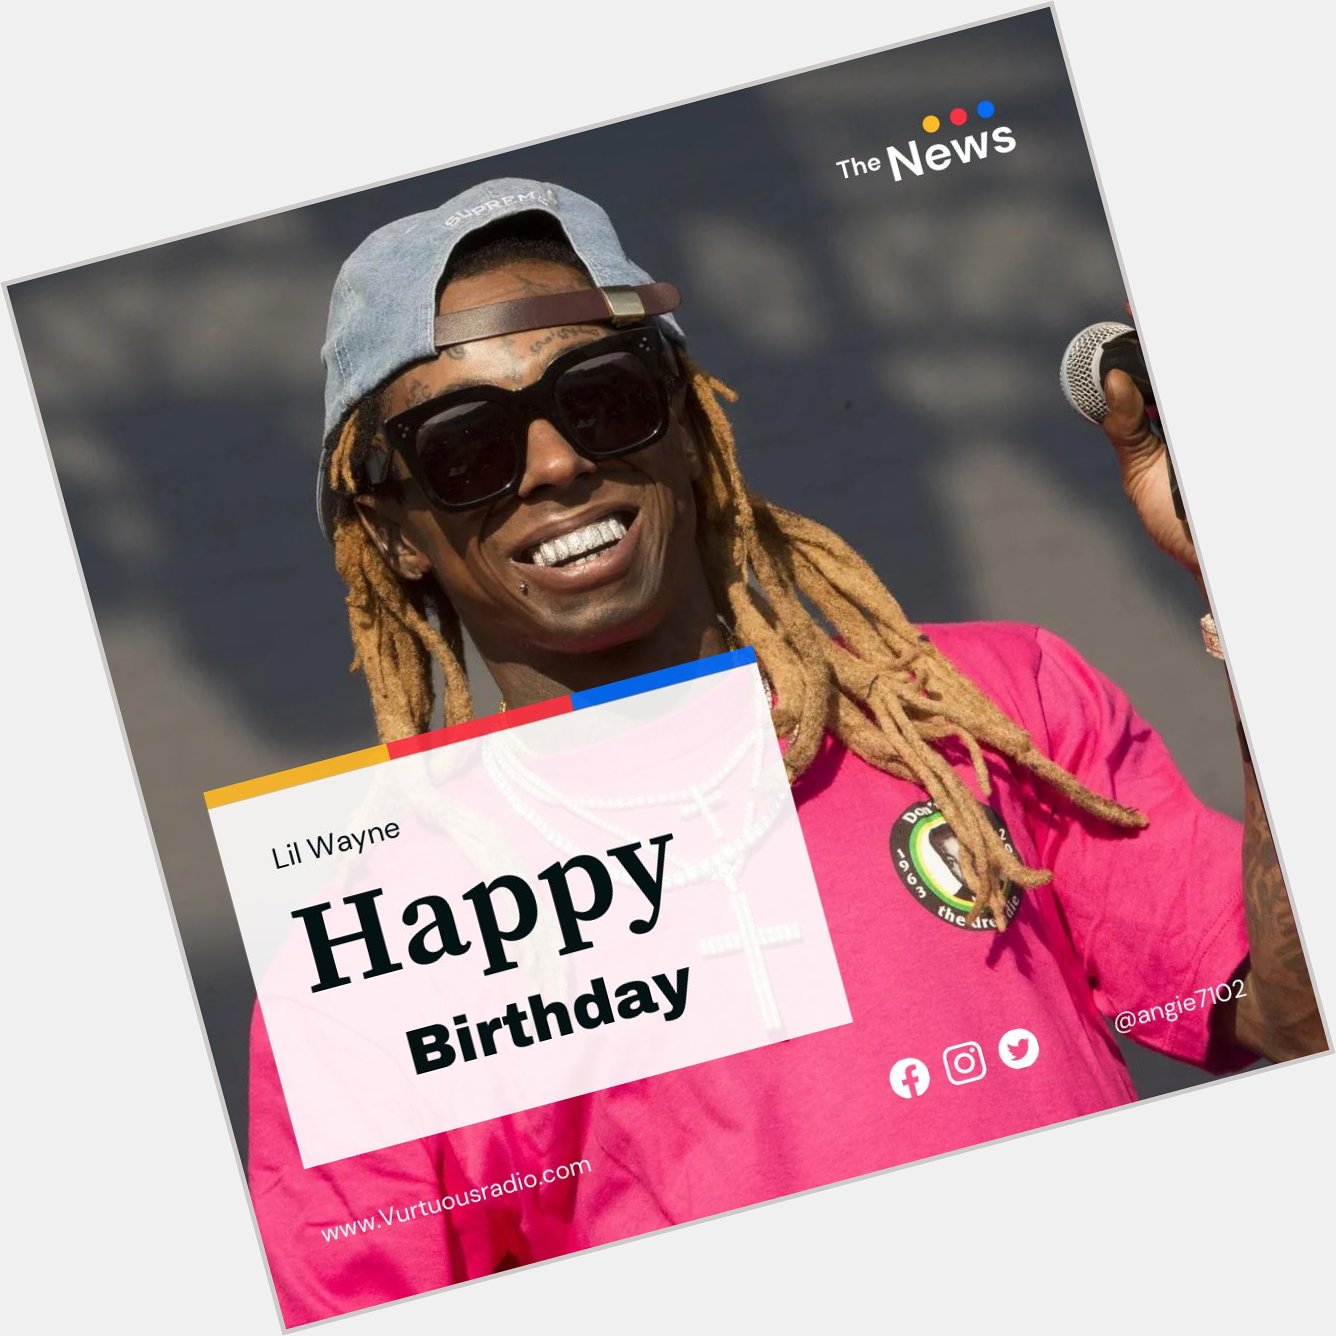 Happy Belated Birthday to Lil Wayne. May God keep blessing you even the more. 